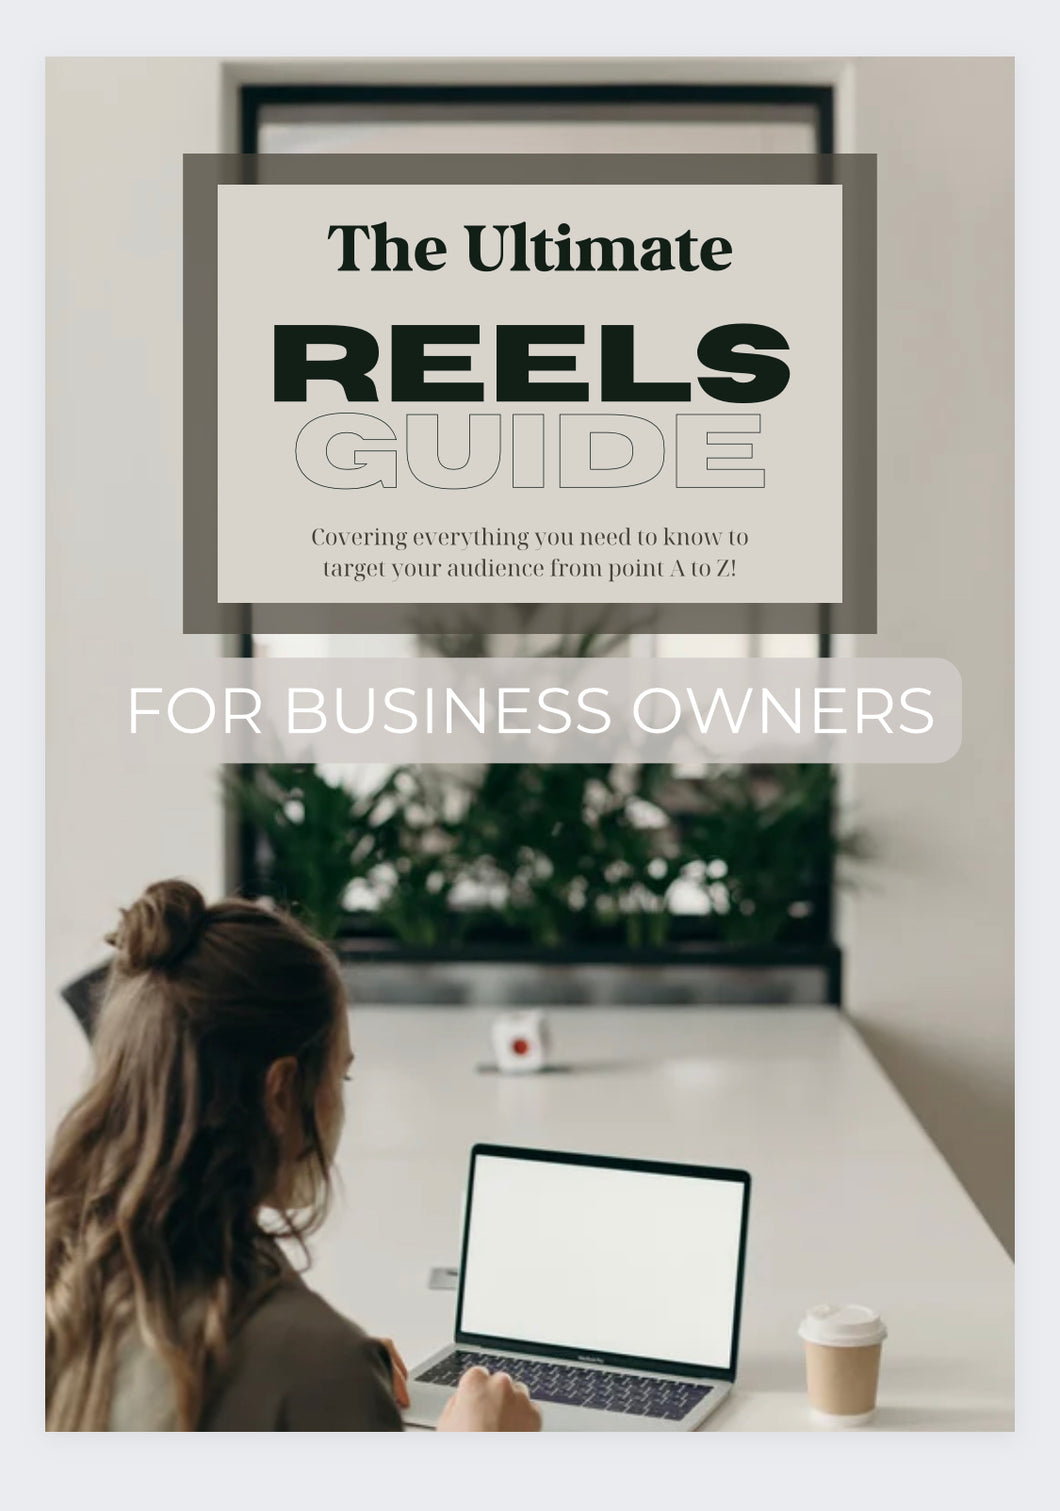 The REEL Deal - How to make more sales with Reels!